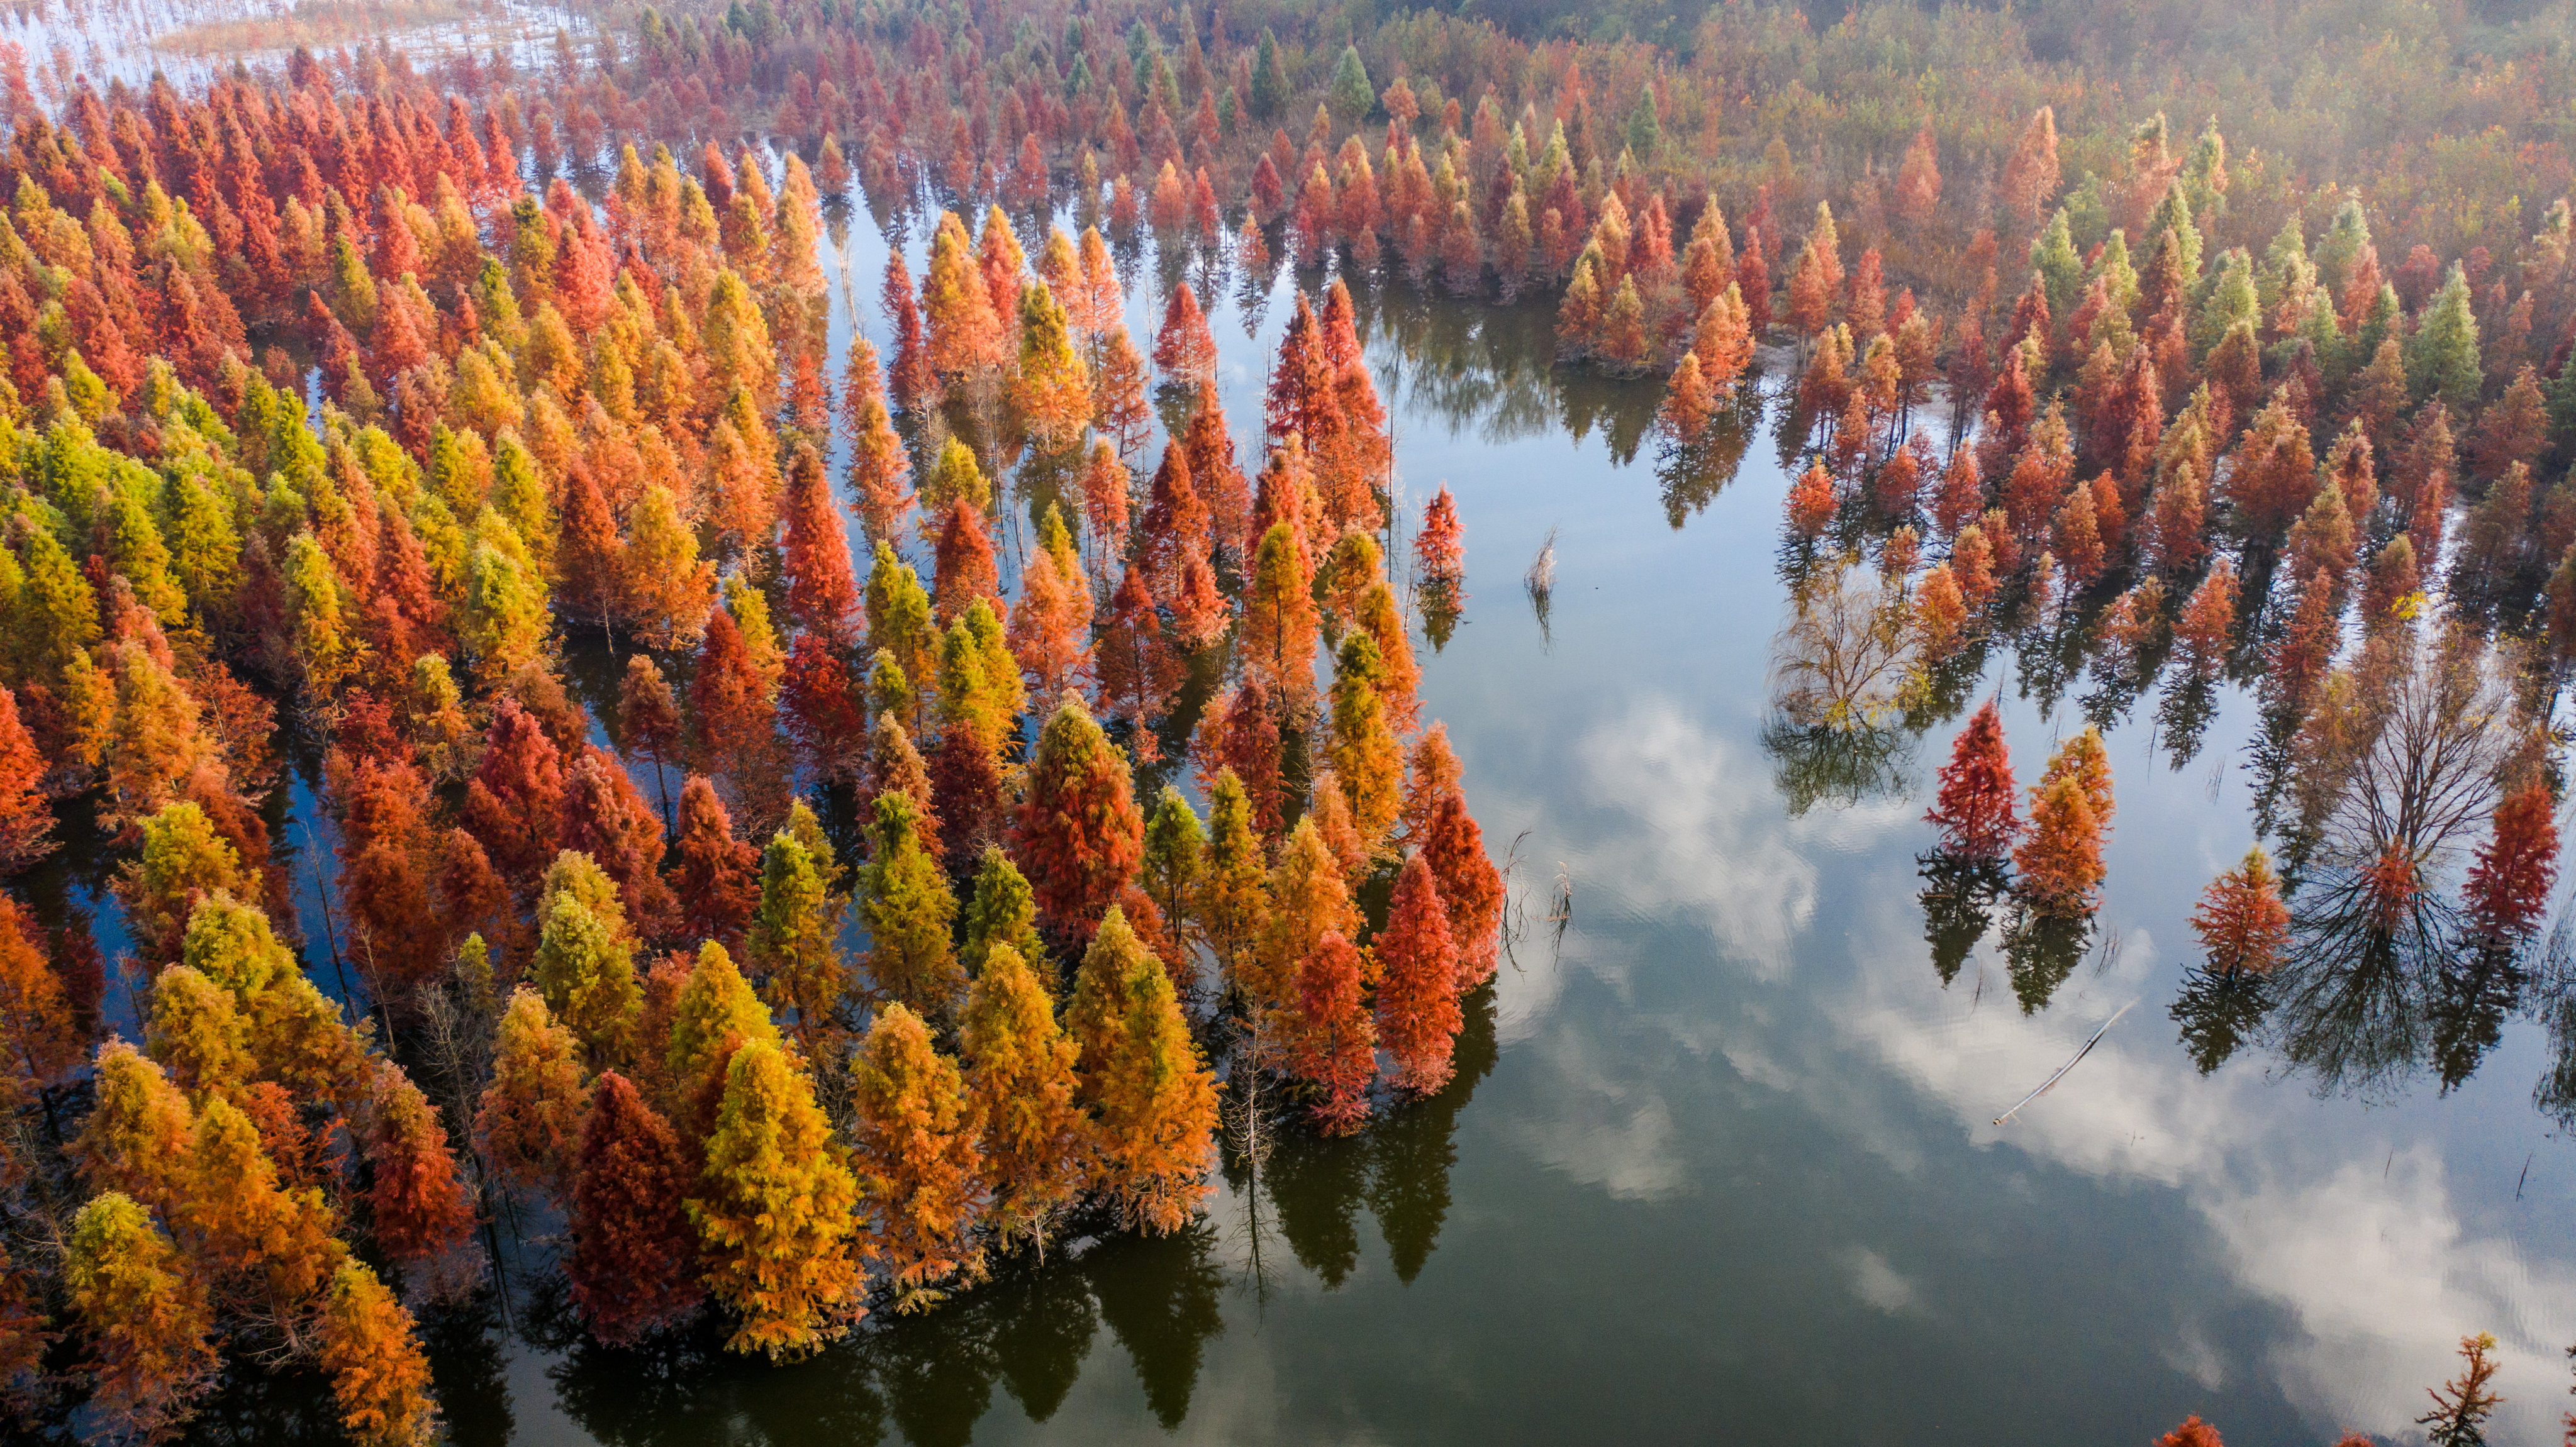 Yunnan province hosts some of China’s most important ecological sites. Photo: Xinhua